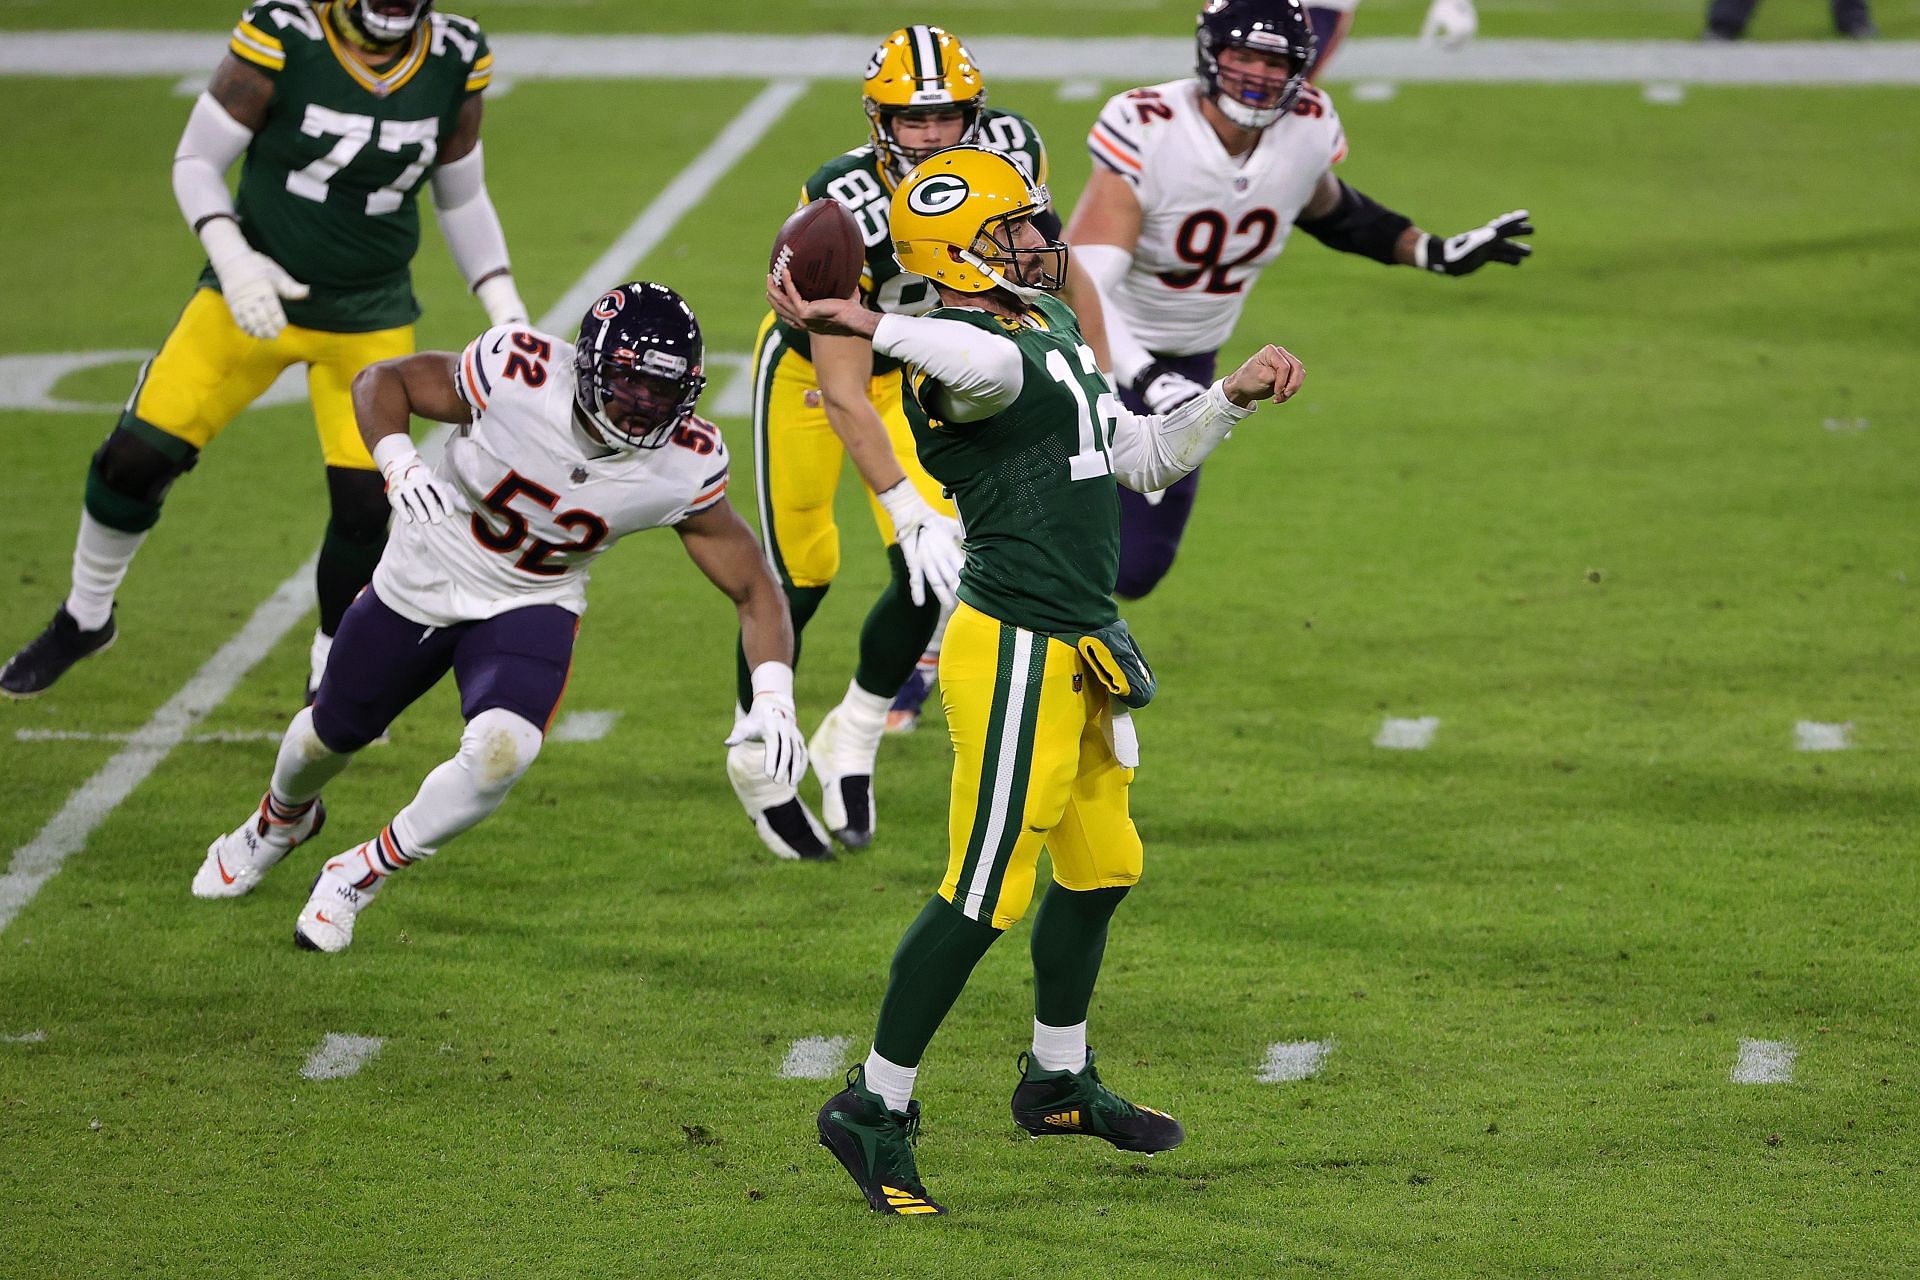 Green Bay Packers QB Aaron Rodgers versus the Chicago Bears